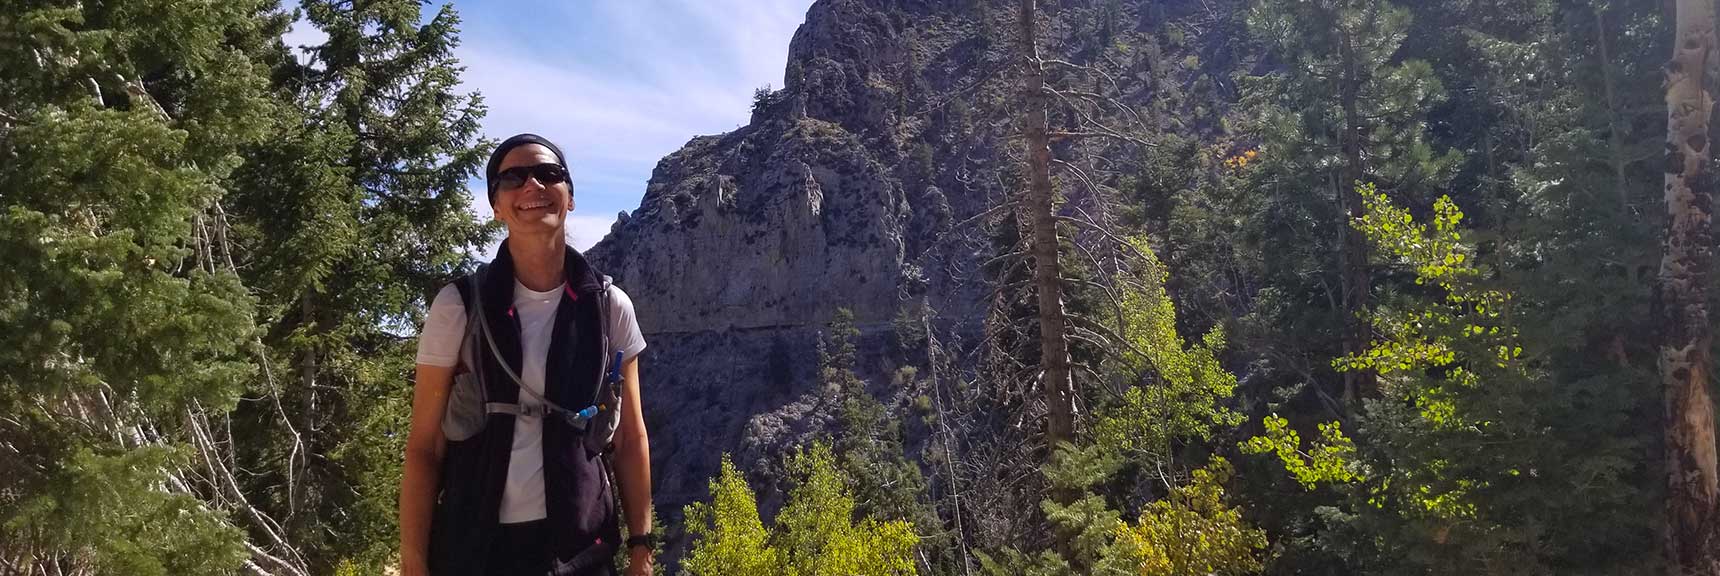 Near the Summit of Cathedral Rock in Mt Charleston Wilderness, Nevada